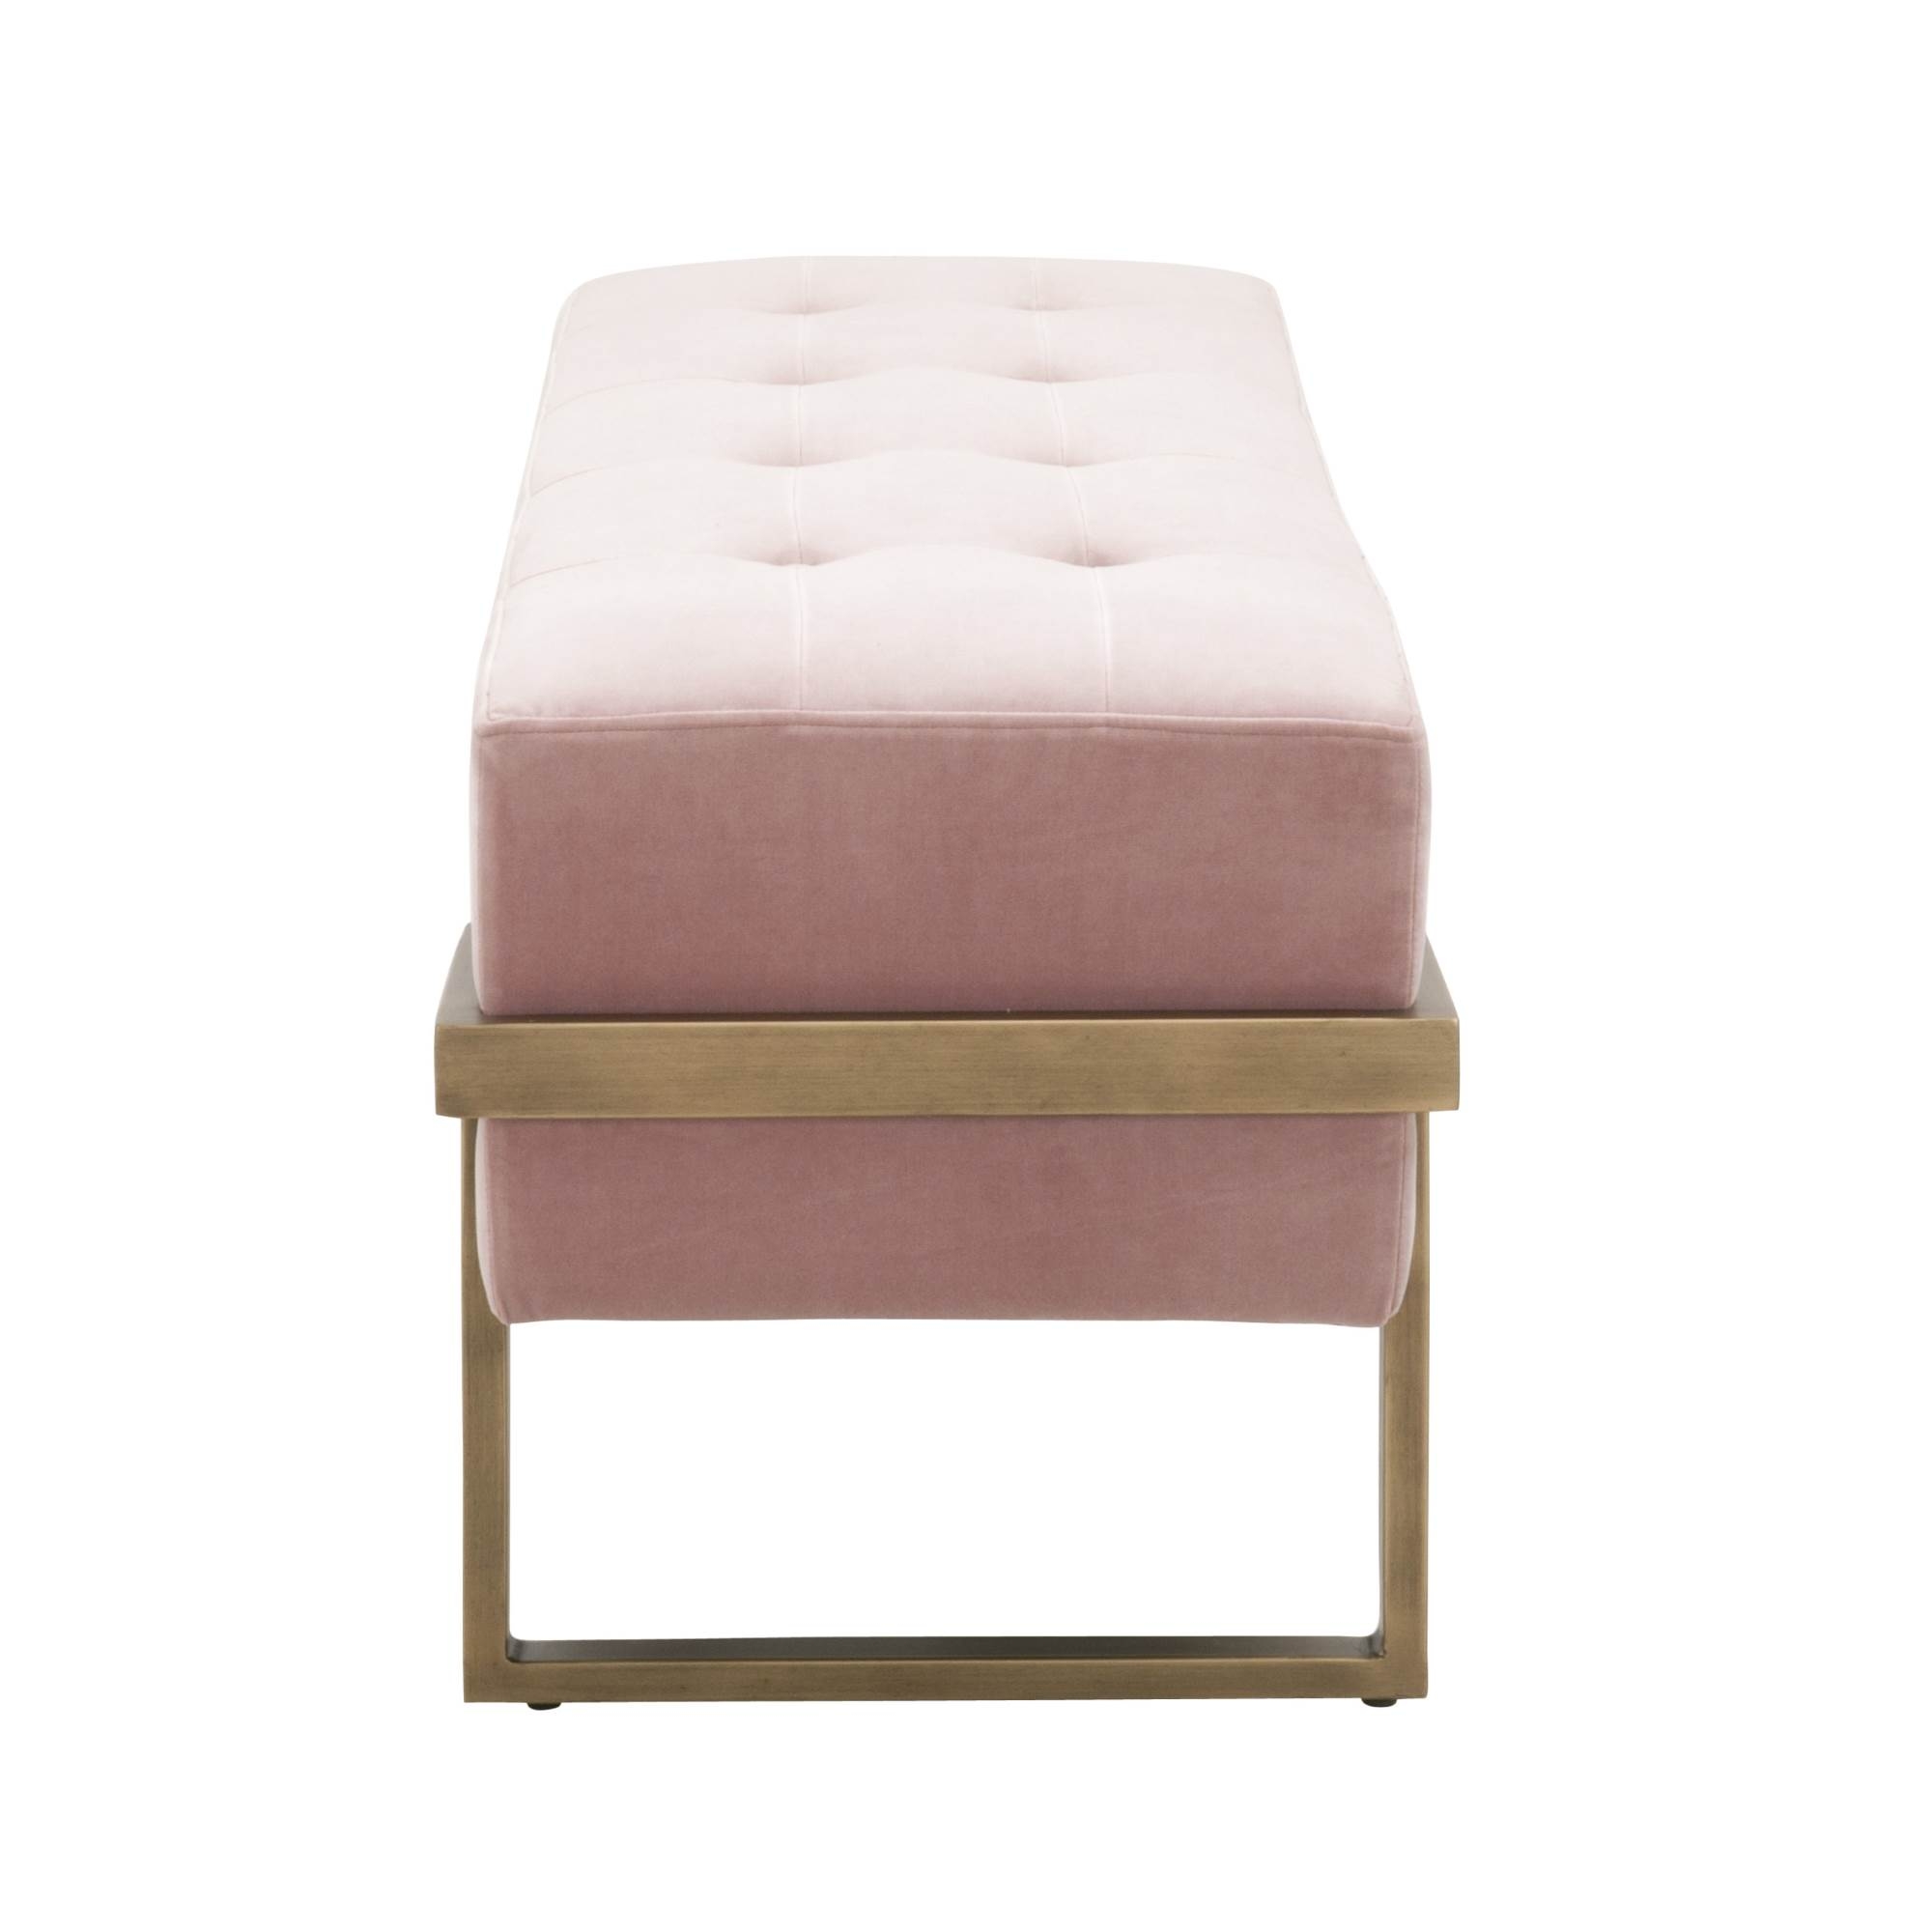 Fiona Upholstered Bench - Image 2